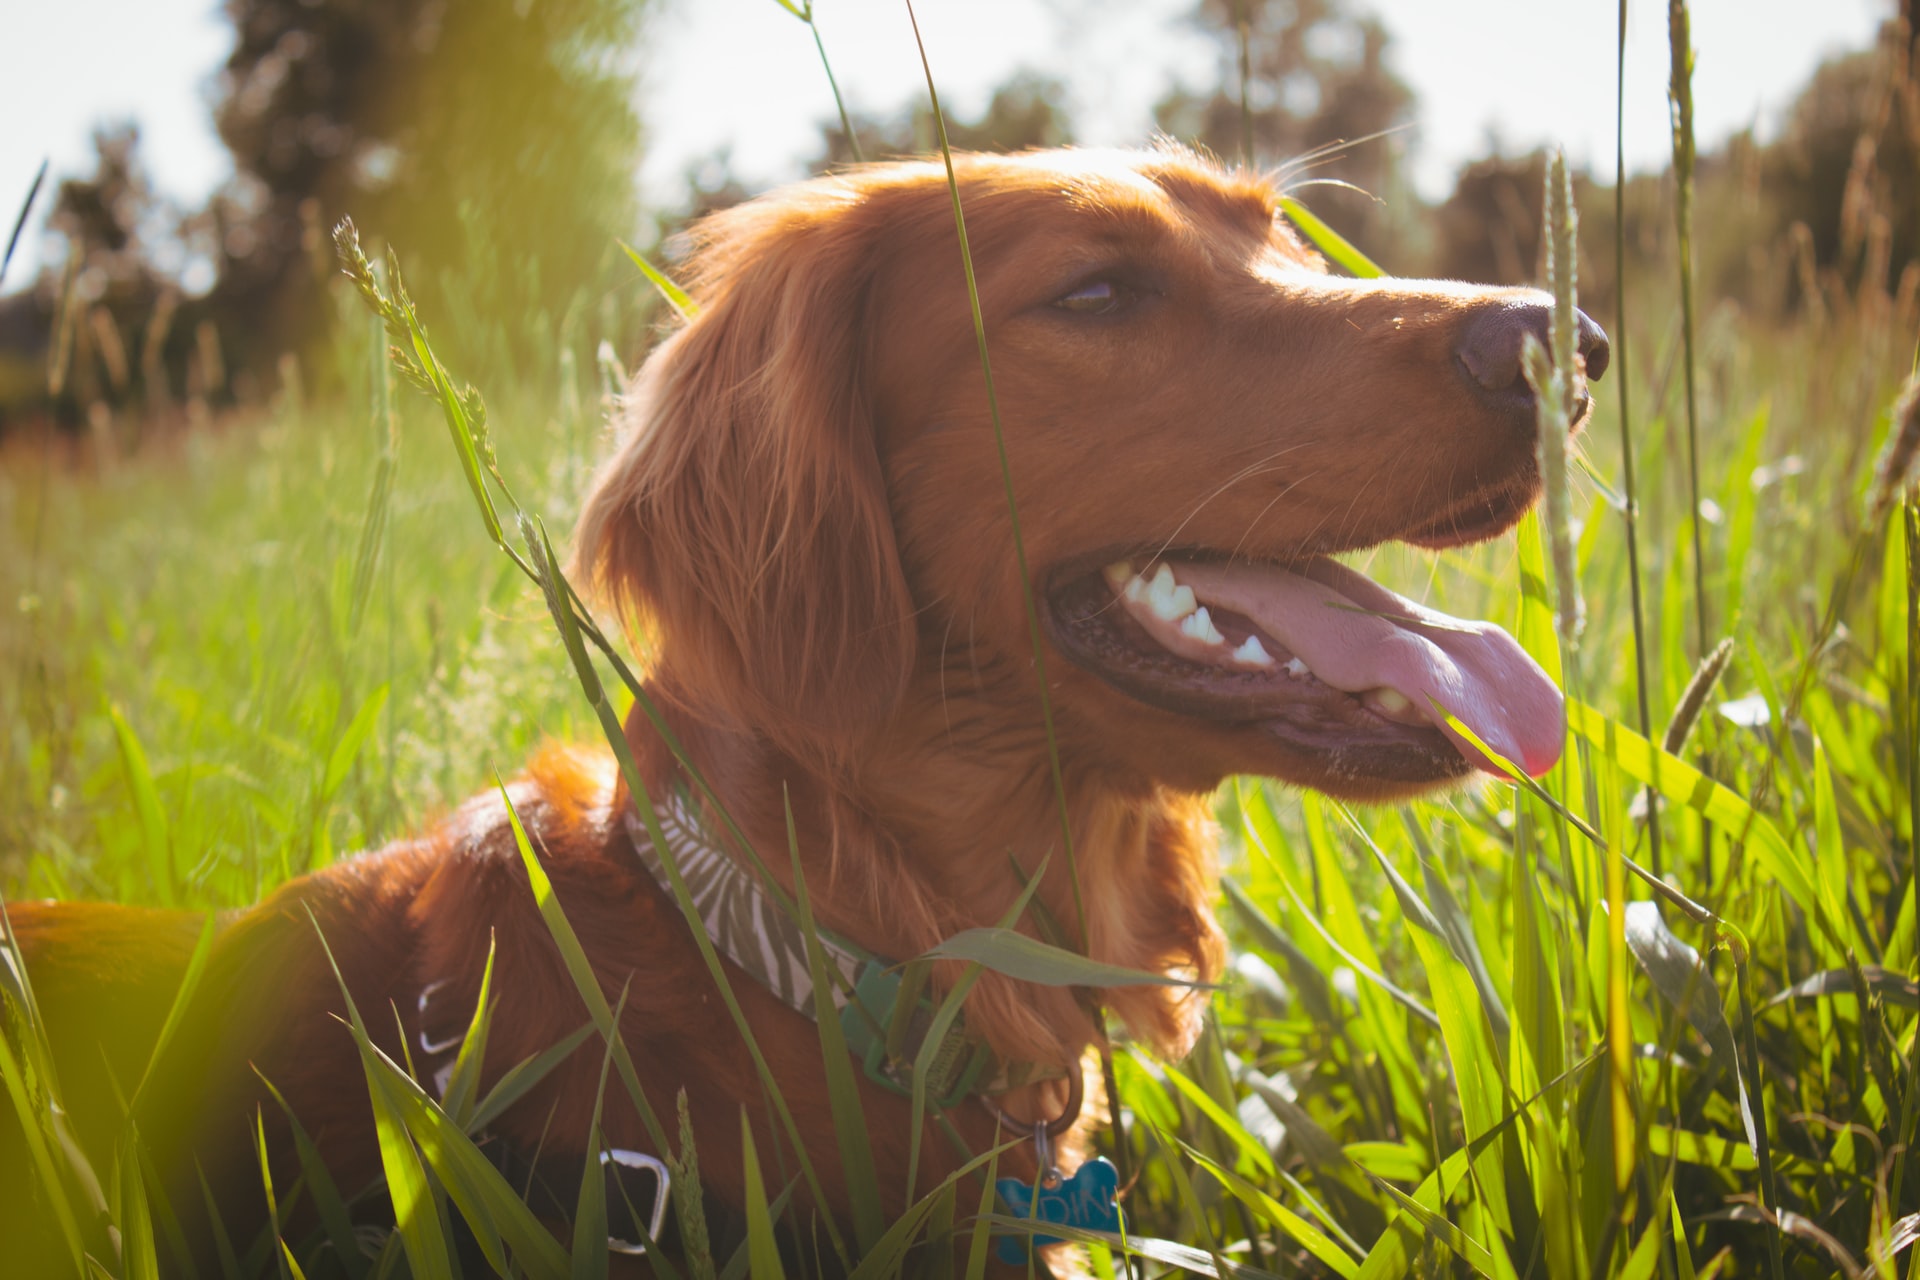 How to protect your dog from foxtails this summer